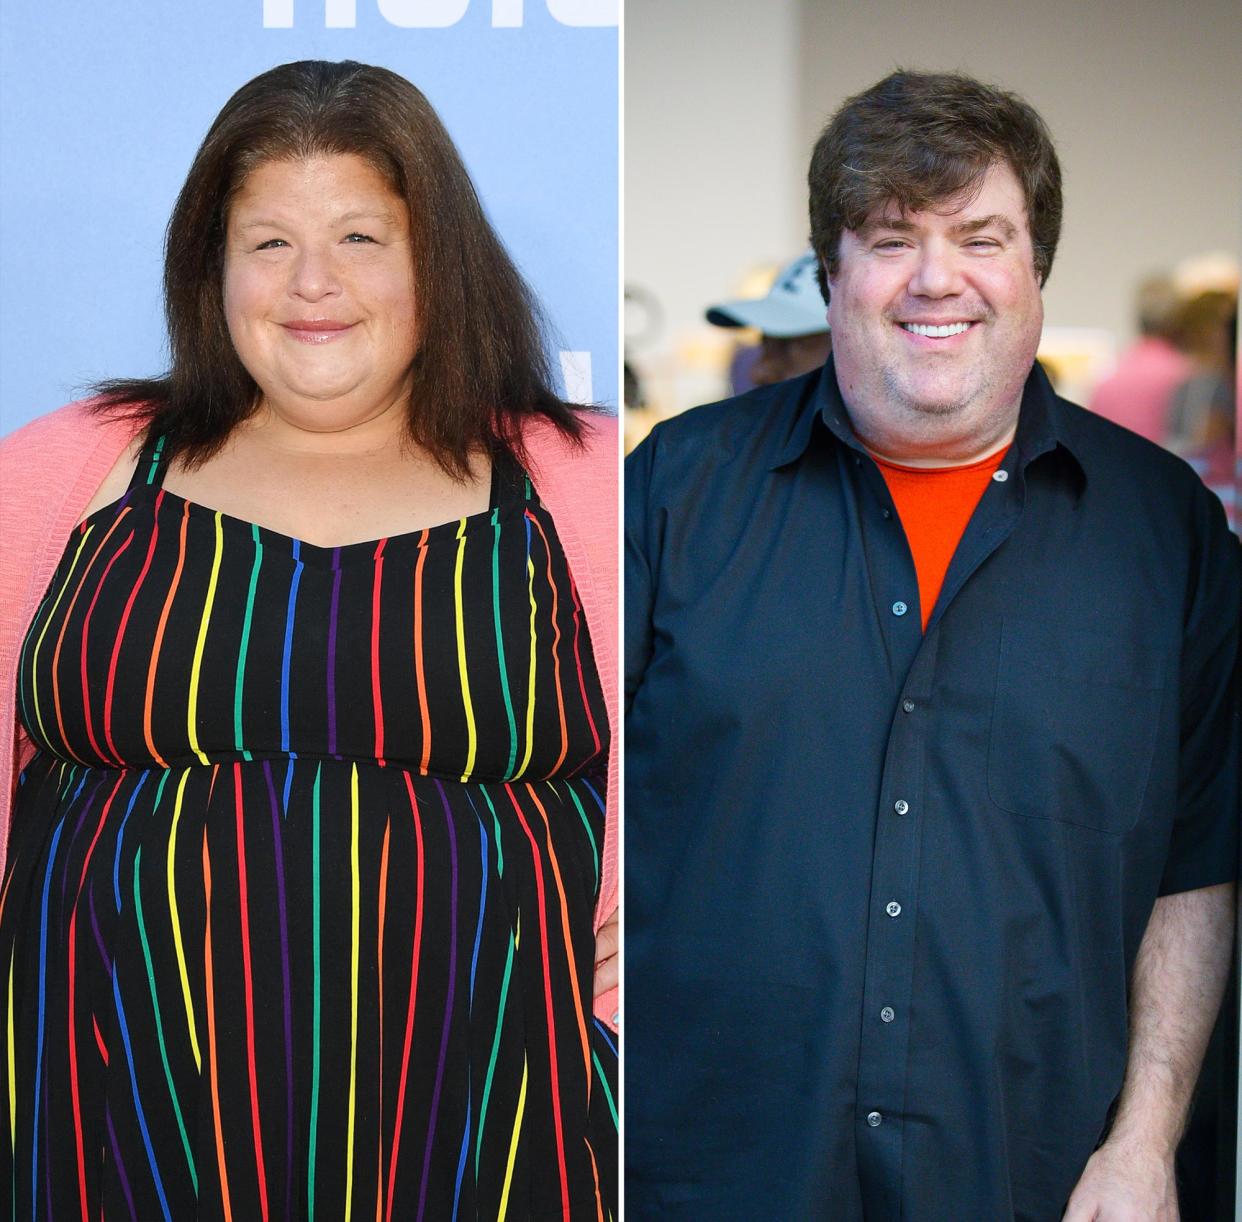 Nickelodeon s Lori Beth Denberg Accuses Dan Schneider of Showing Porn Initiated Phone Sex and More 057